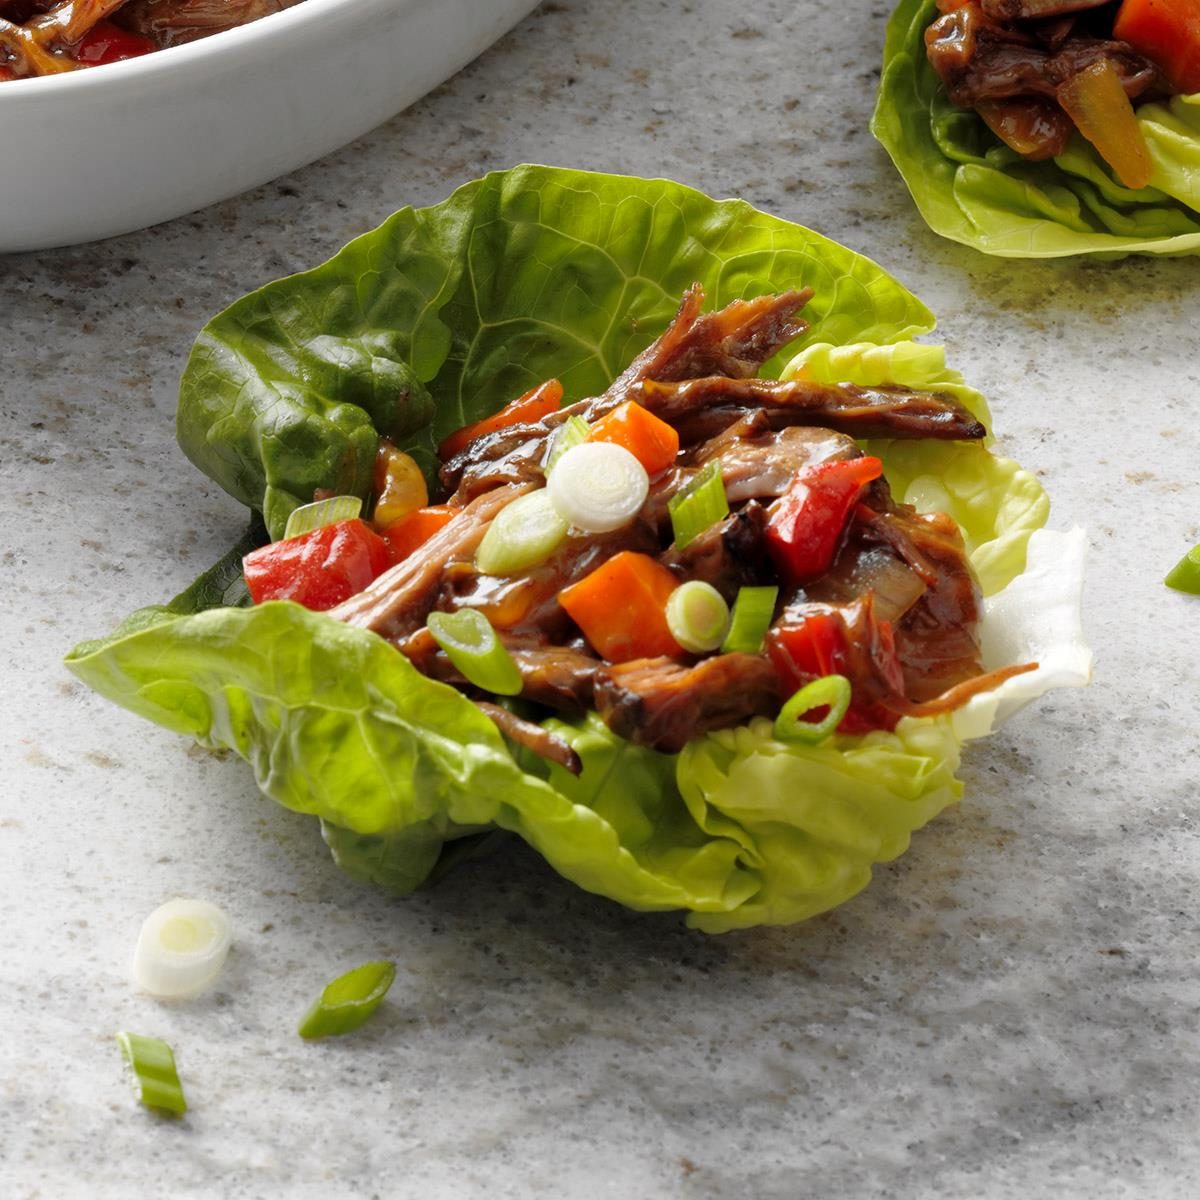 Day 4: Slow Cooker Shredded Beef Lettuce Cups